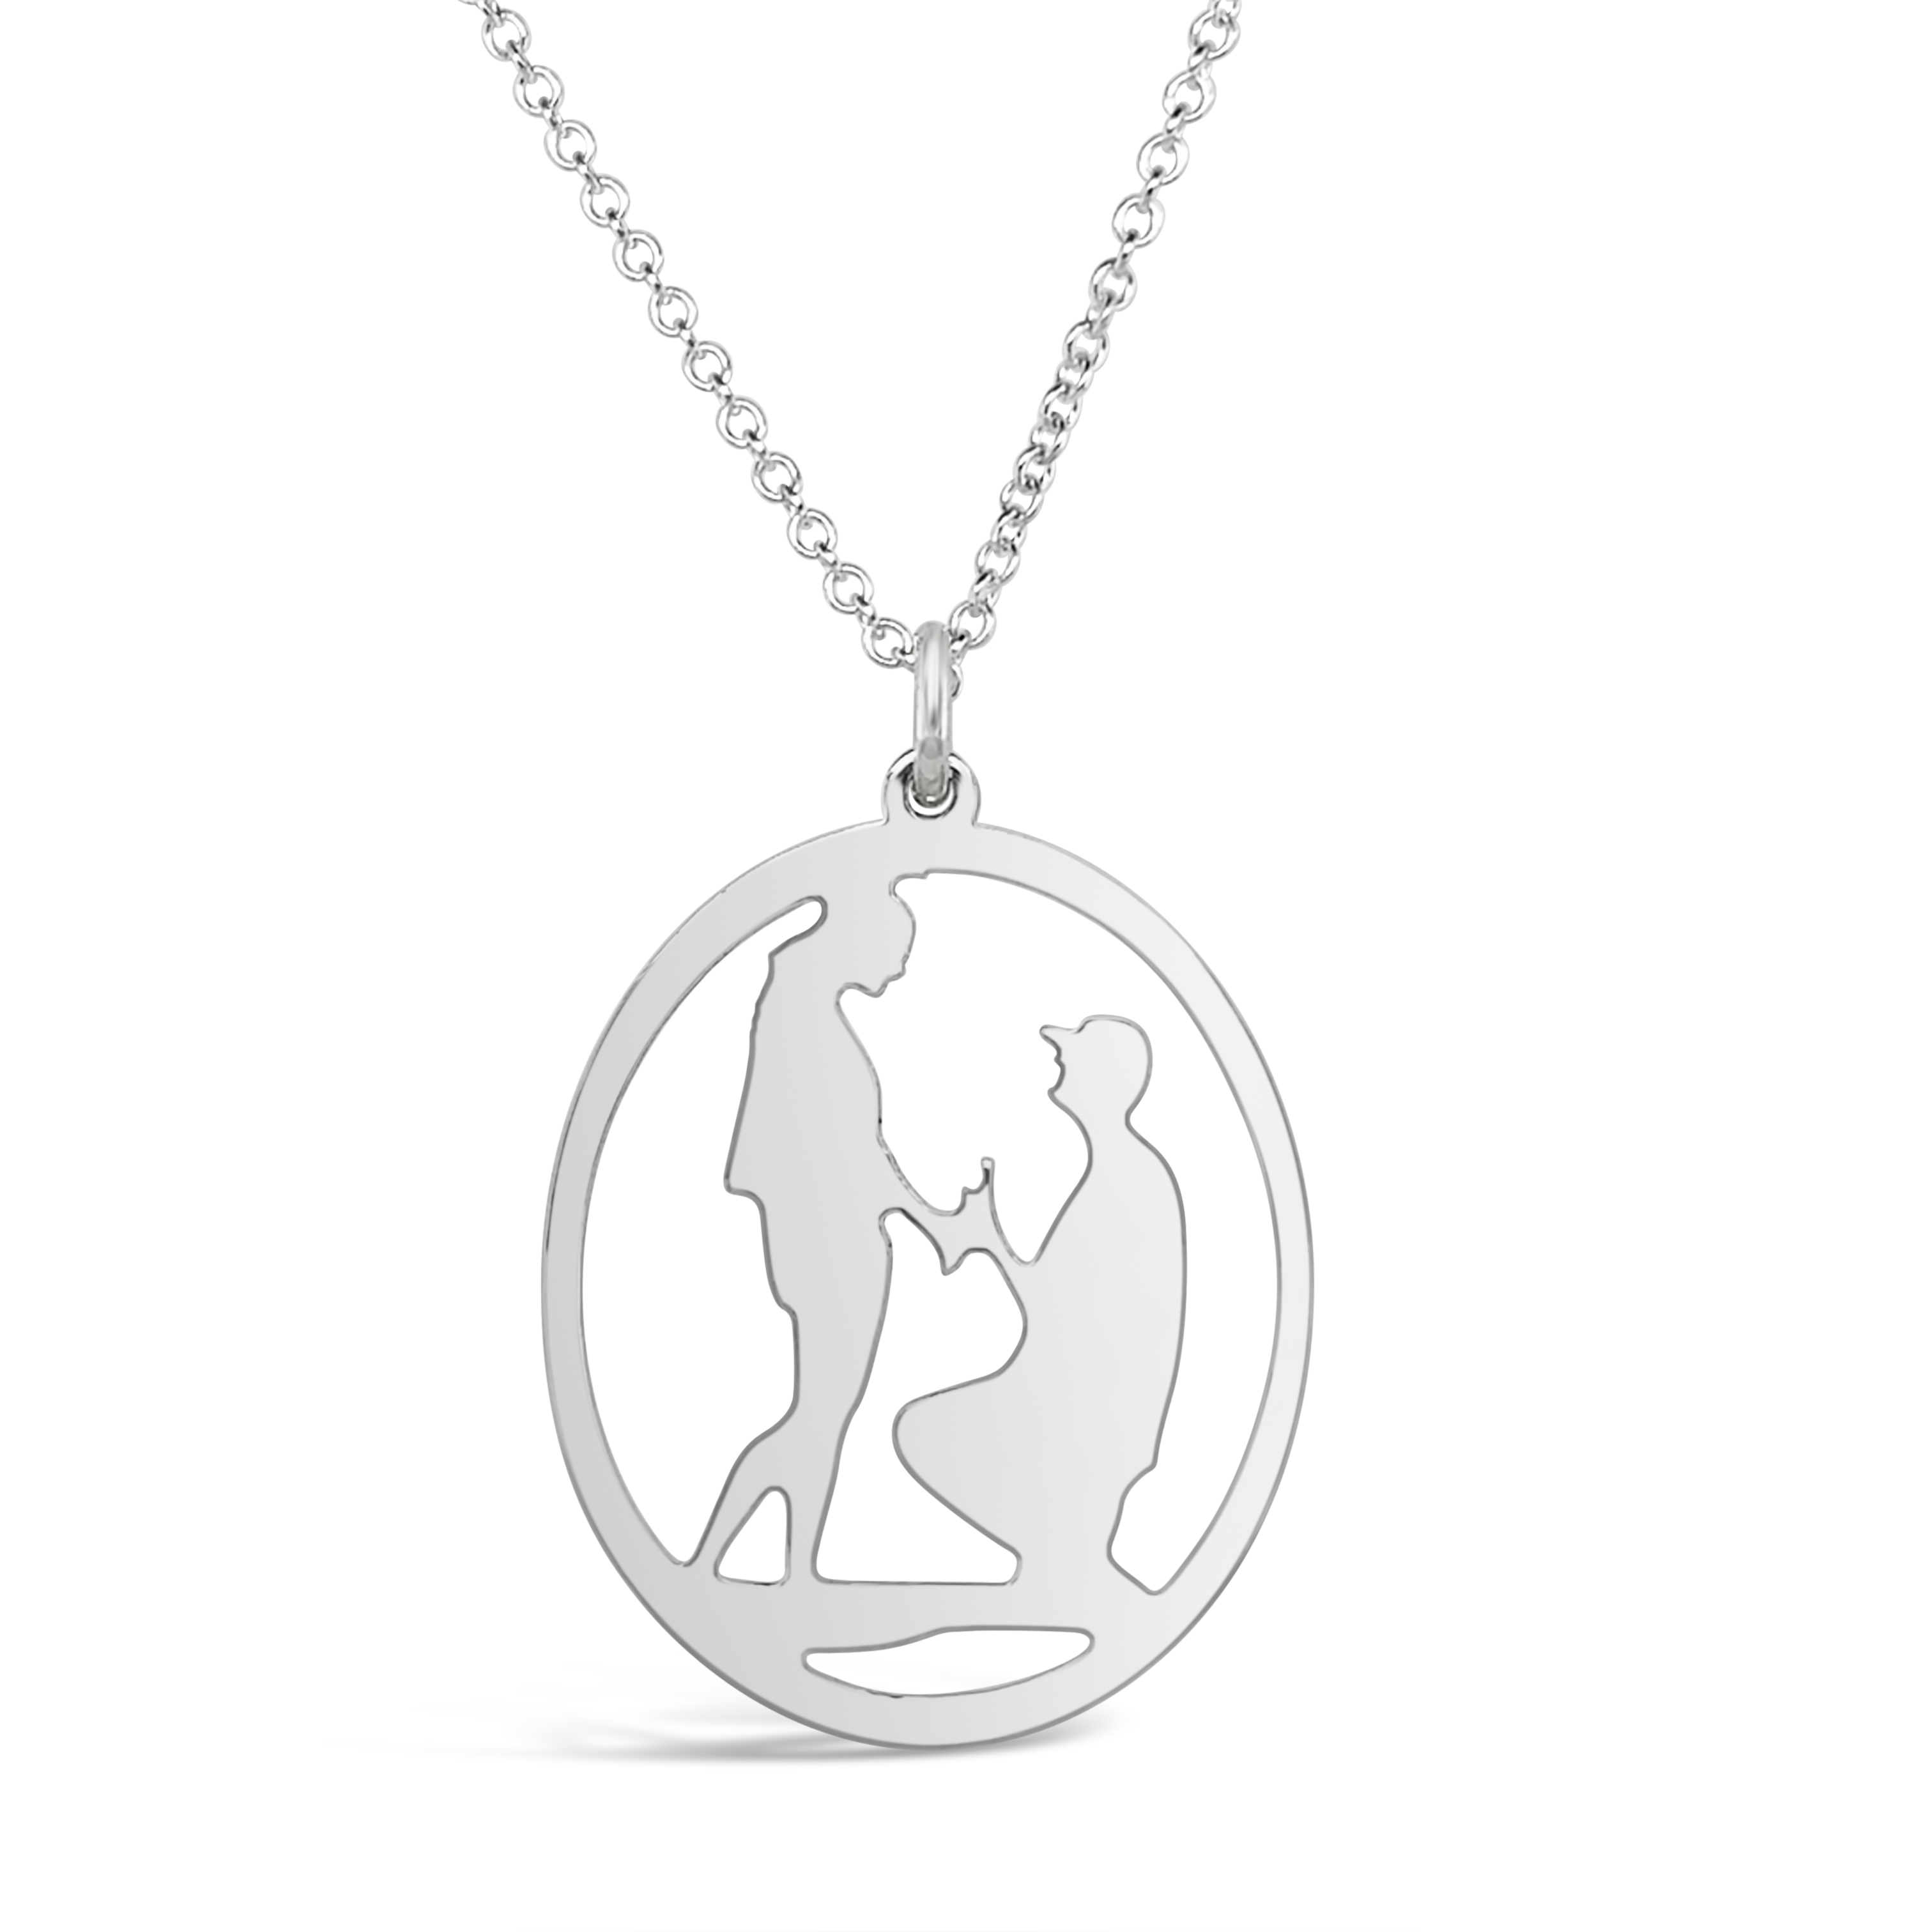 Personalized Silhouette Charm Necklace